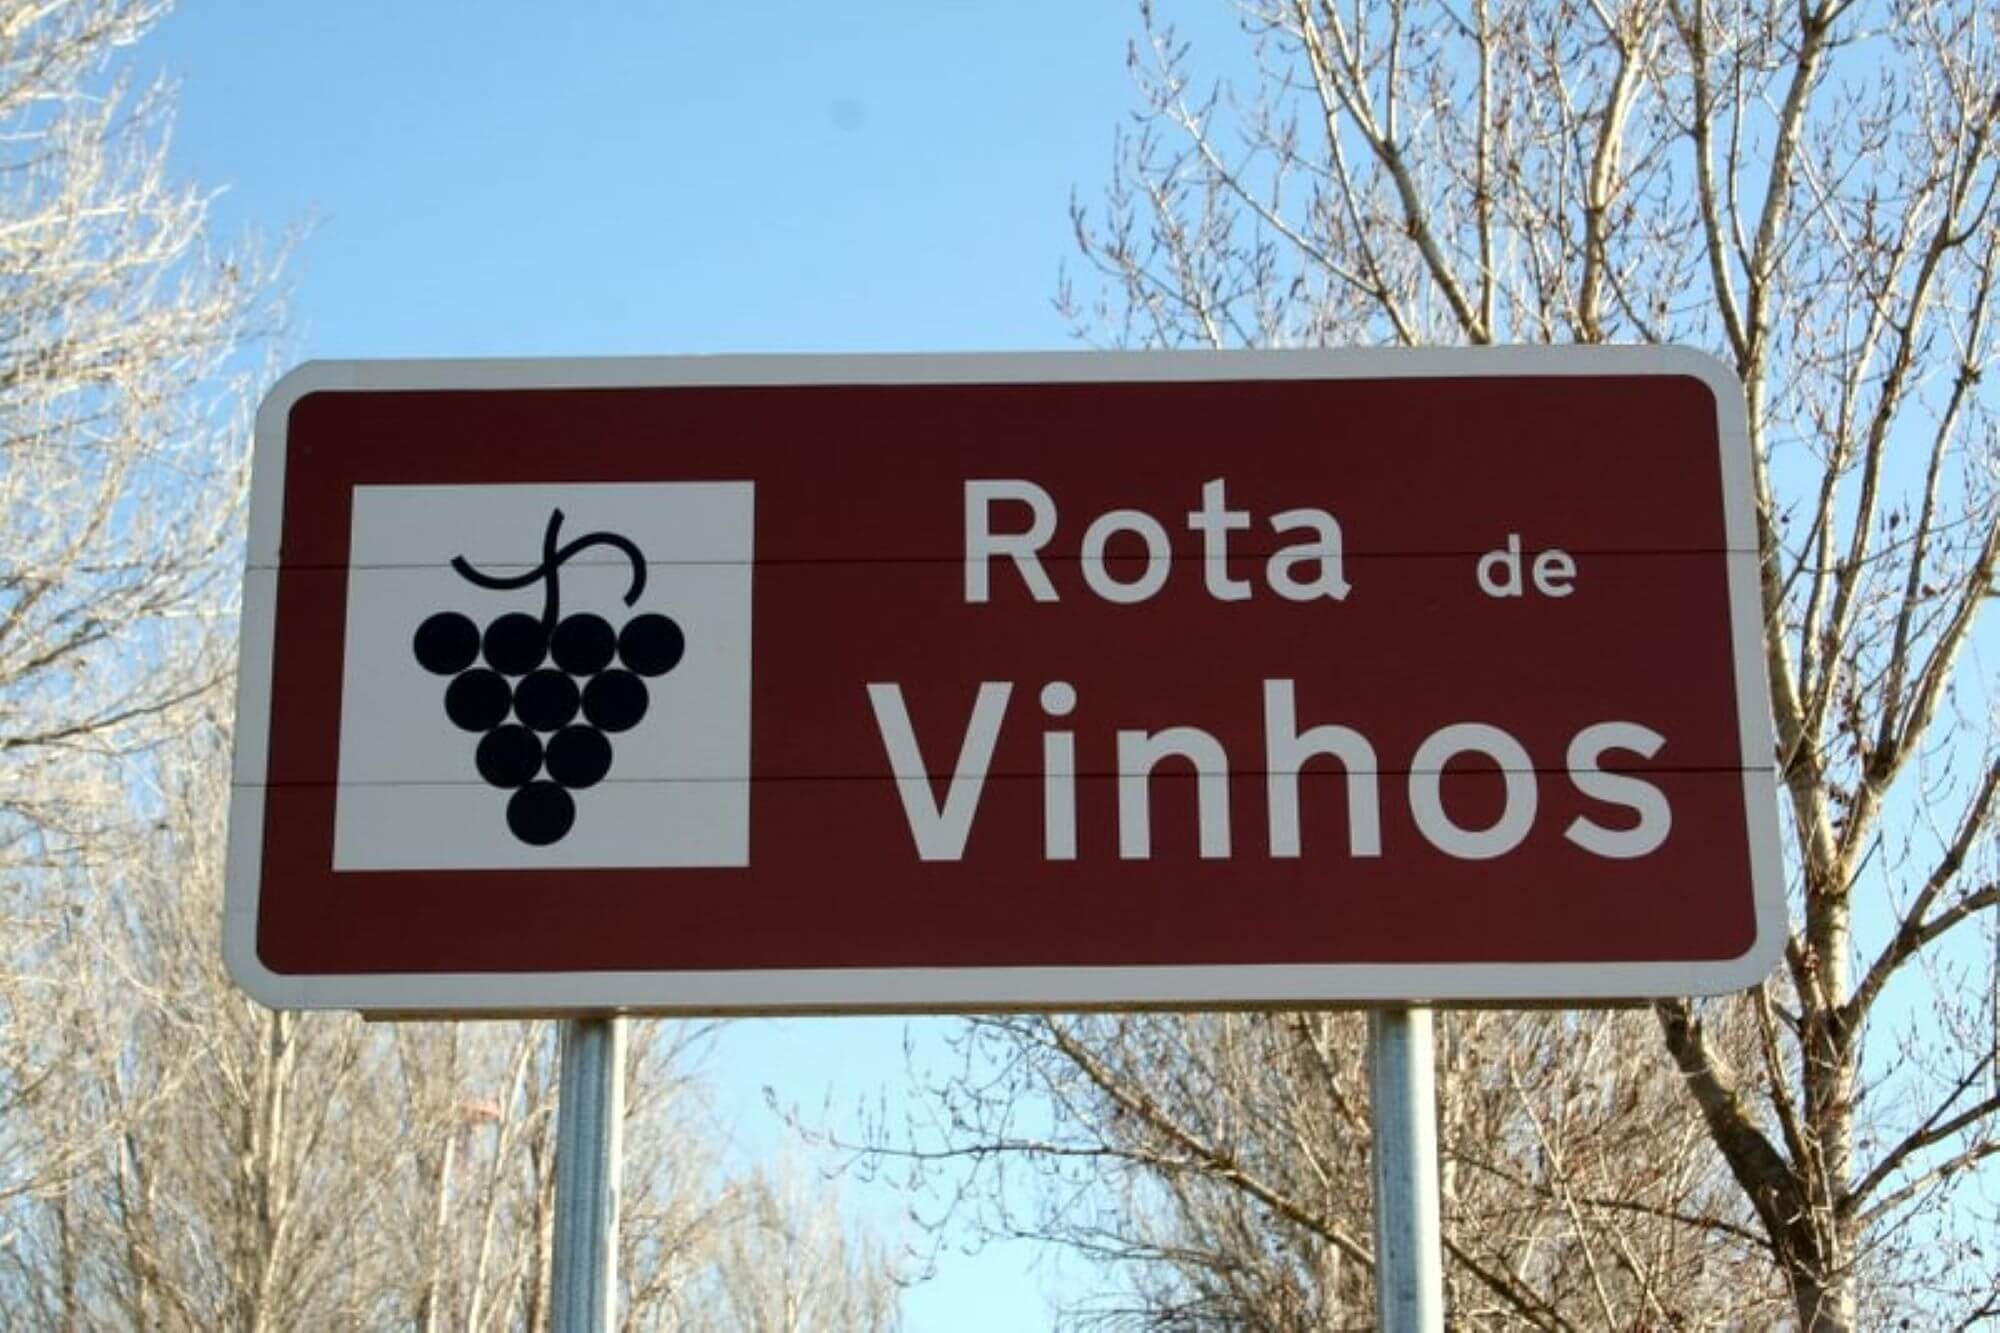 road sign indicating where to go for visiting vineyards and identifying a wine region, with grapes drawn in it.